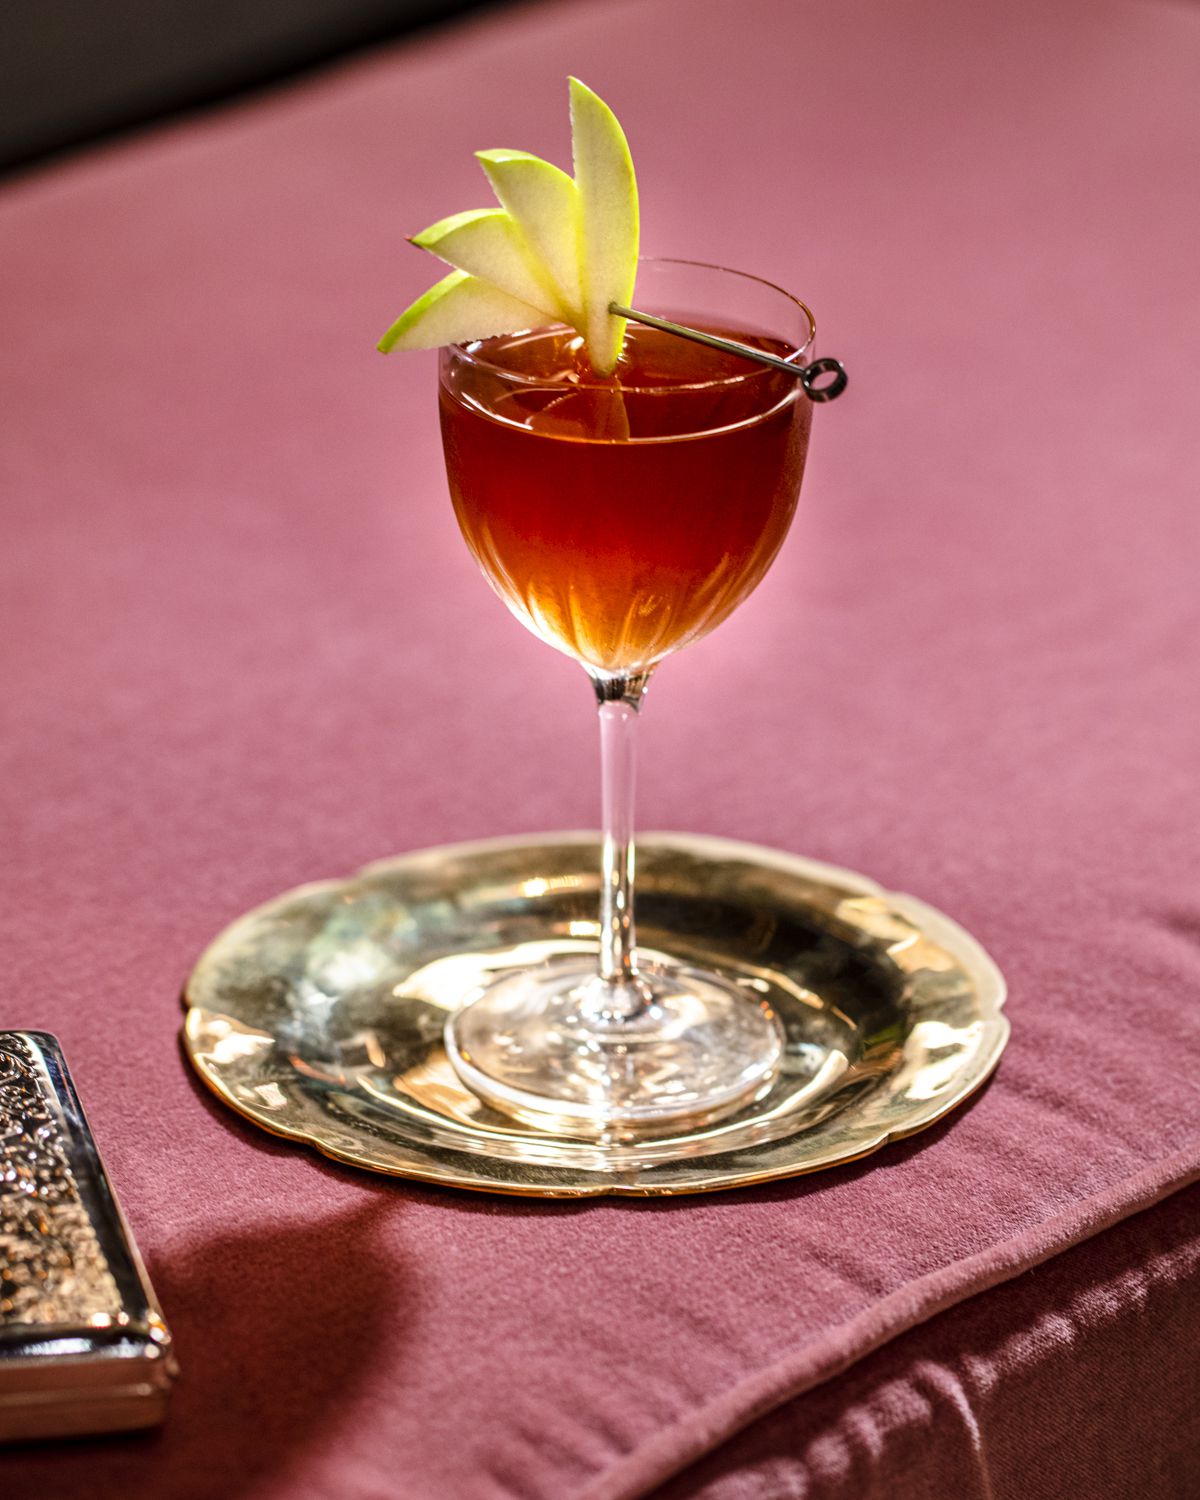 A small dark cocktail in a glass with sliced apple garnish.